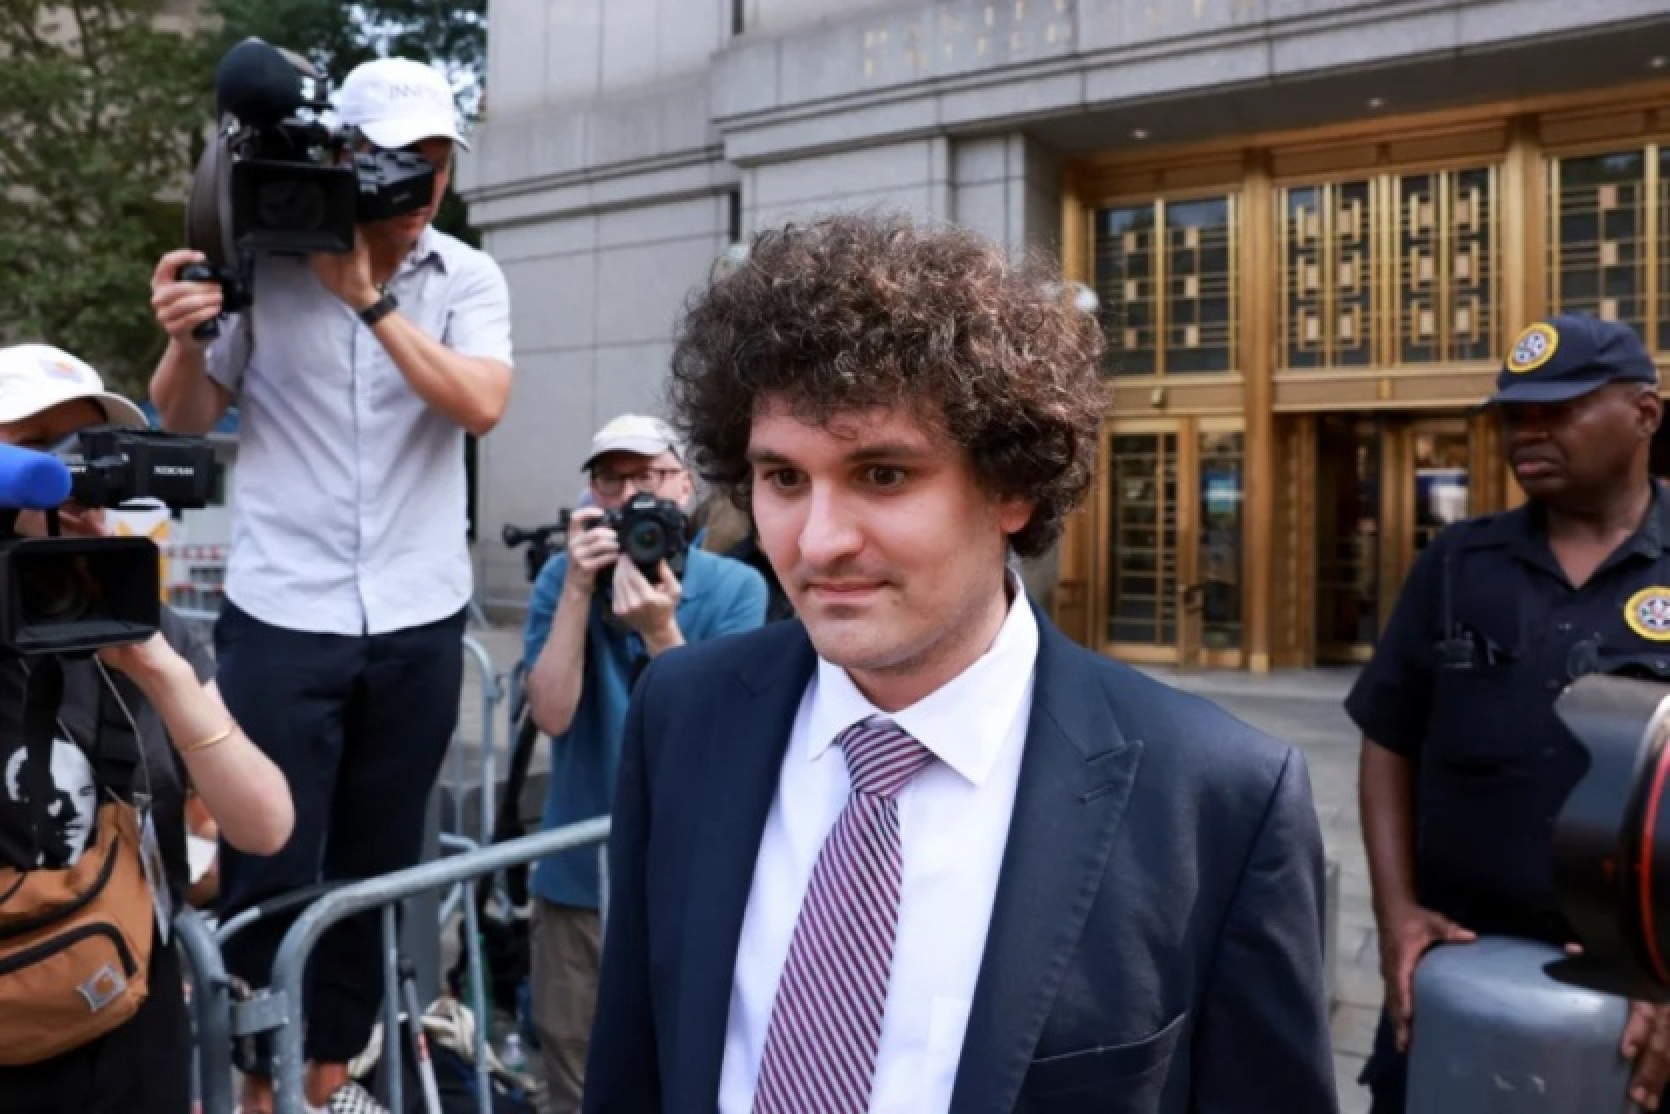 Sam Benkman-Fried found guilty of fraud - FTX founder faces up to 110 years in prison